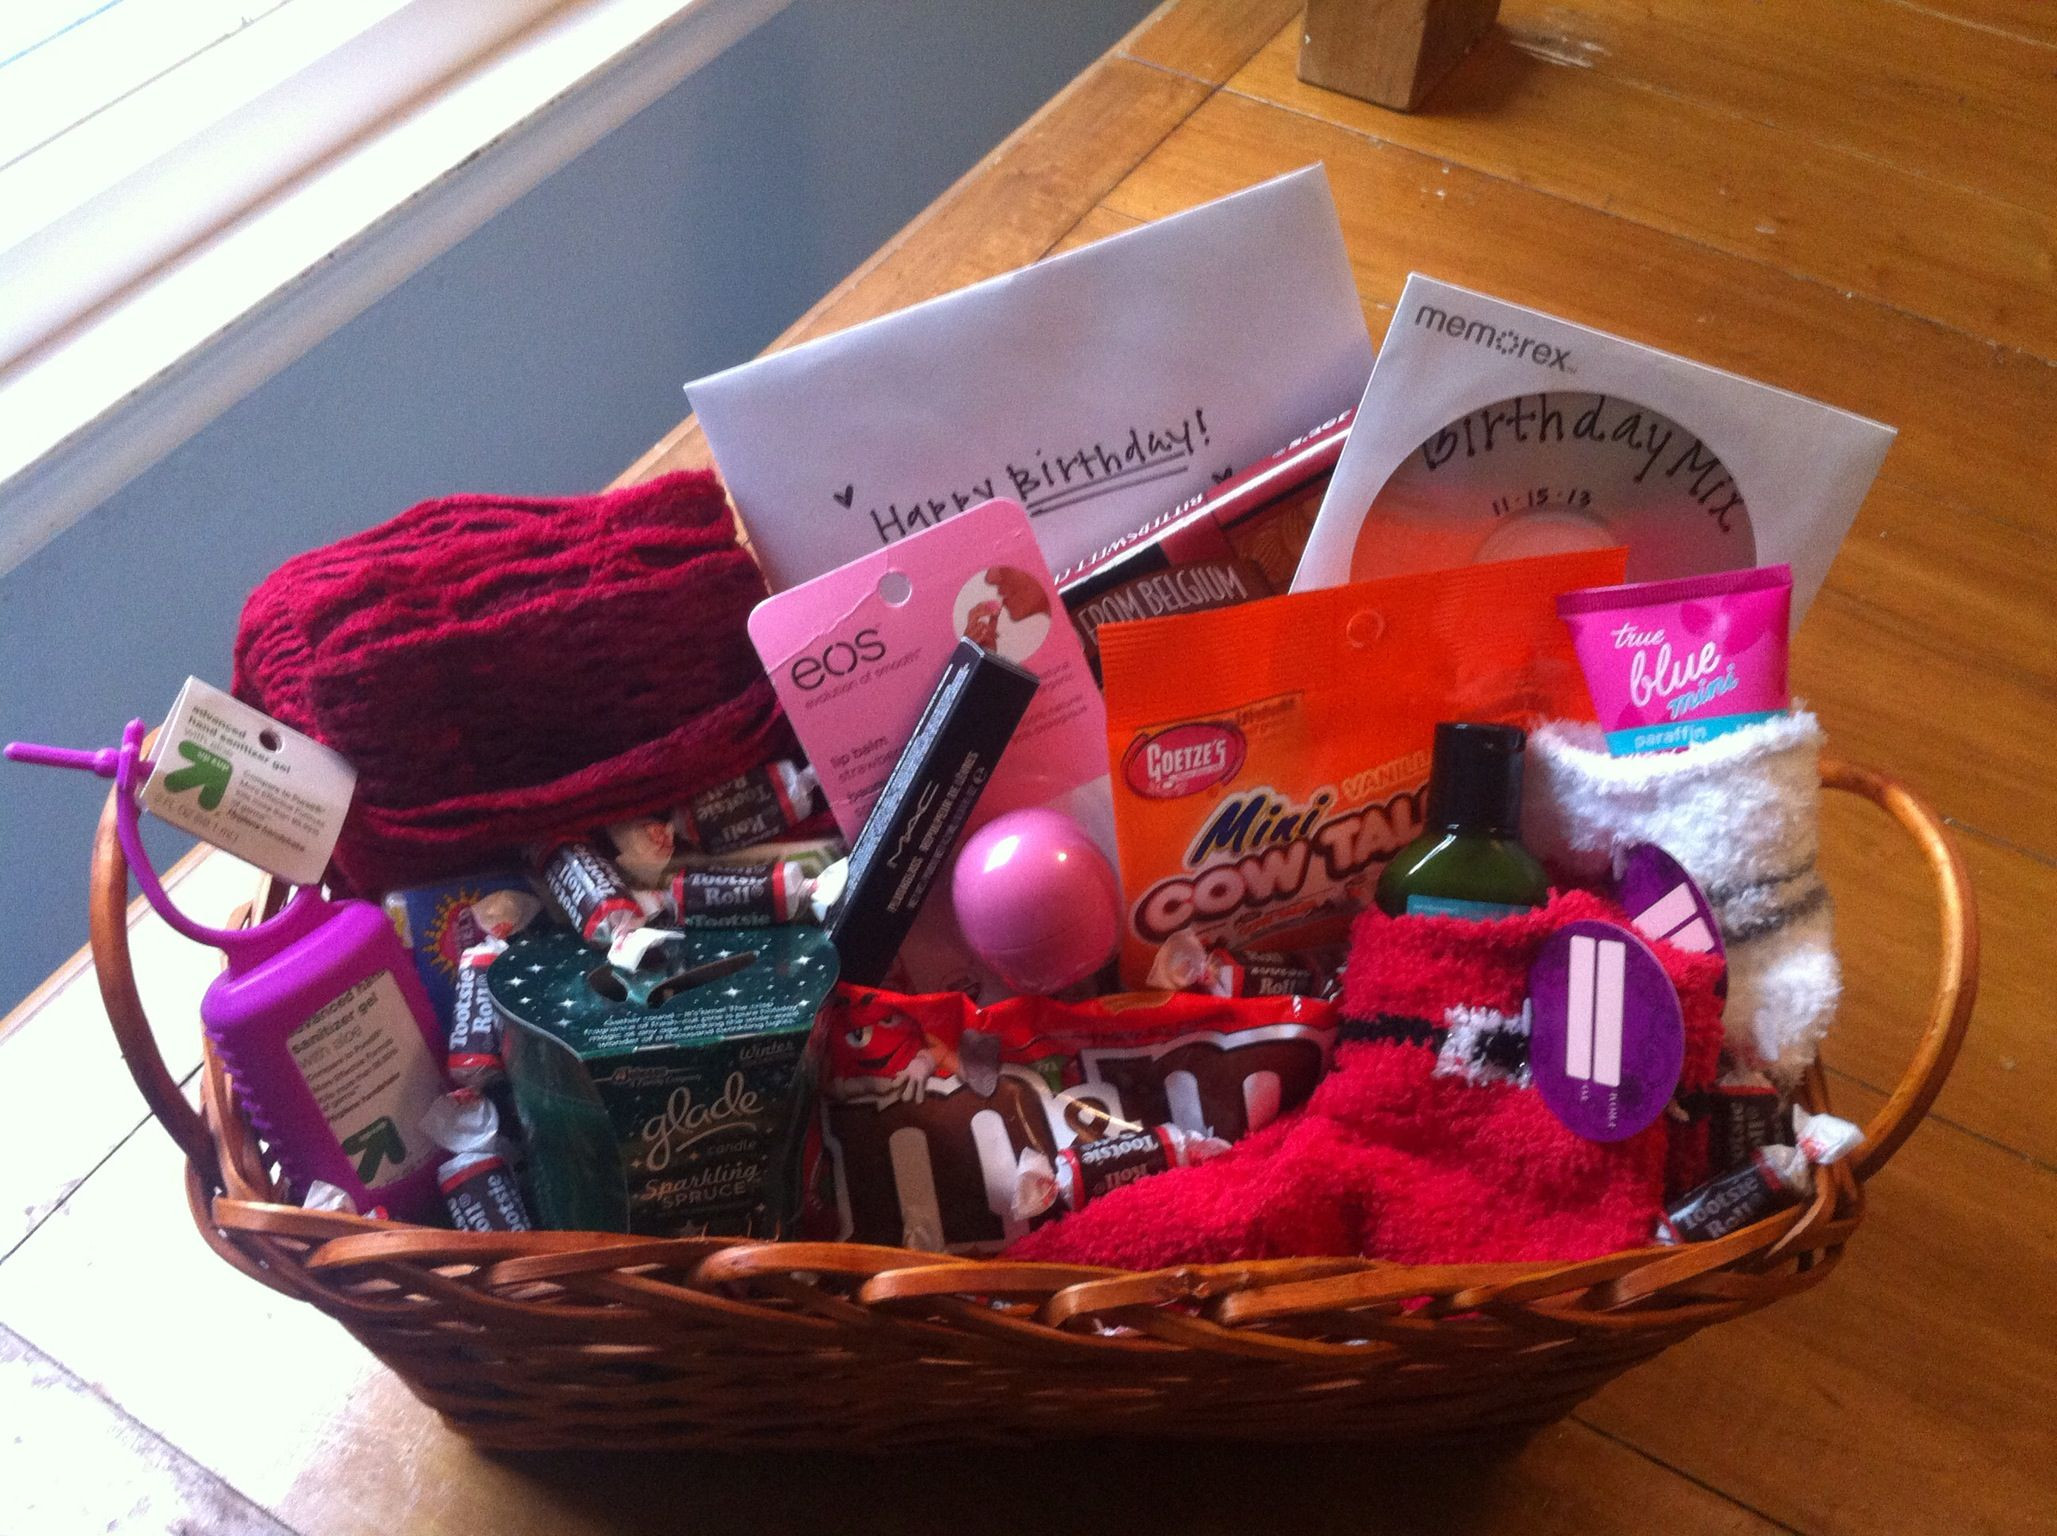 Xmas Gift Ideas For Mother In Laws
 I made this t basket for my future mother in law